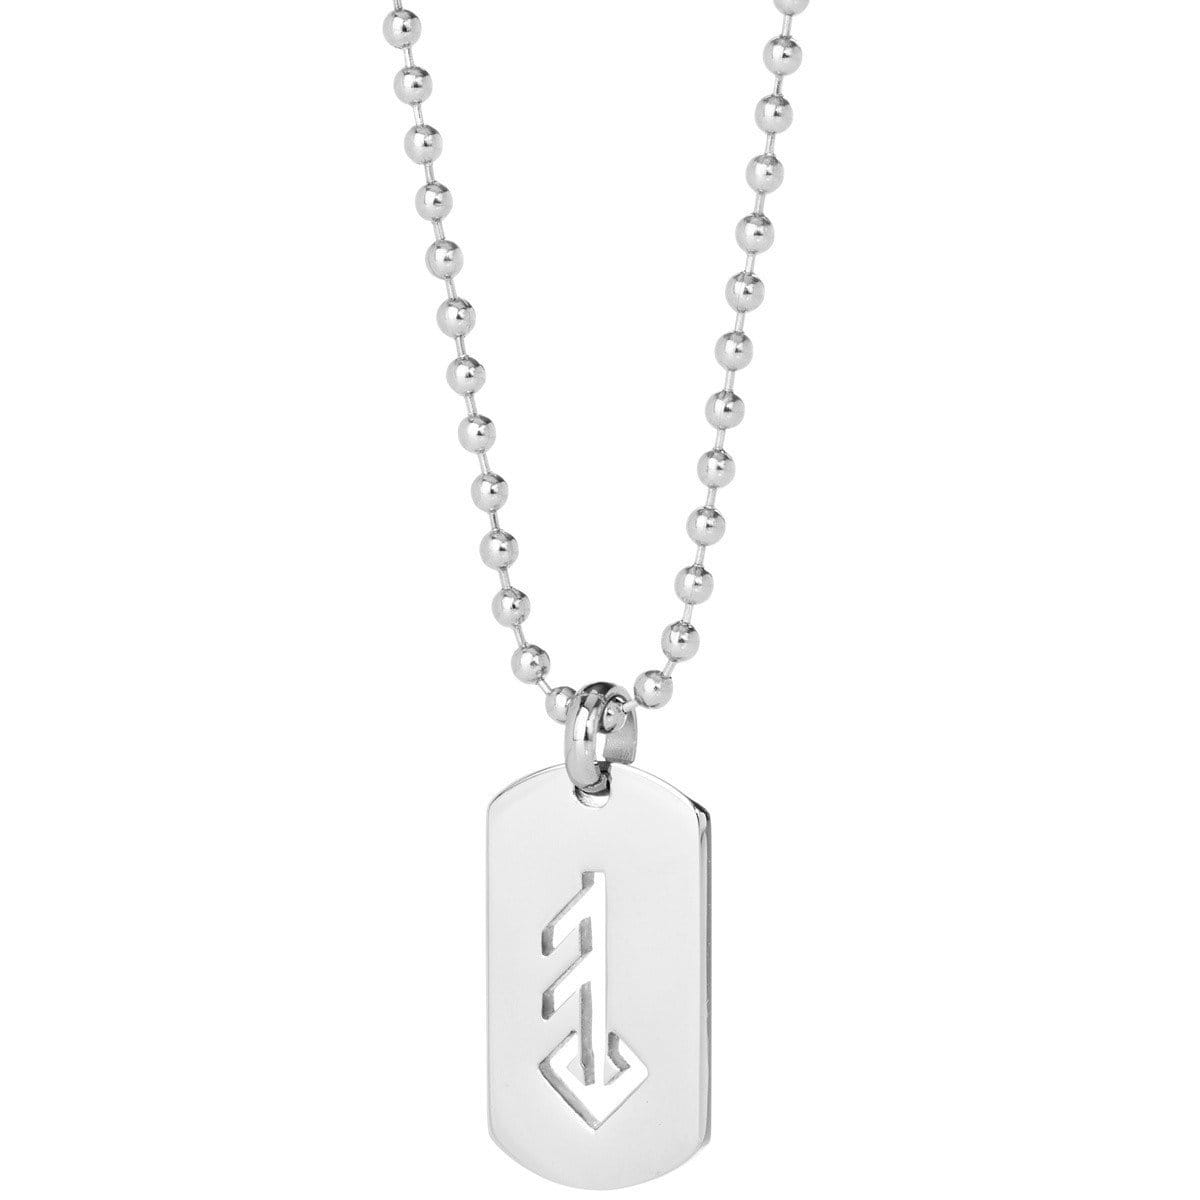 LOVE / ÁST STEEL DOG TAG NECKLACE - icelandicstore.is